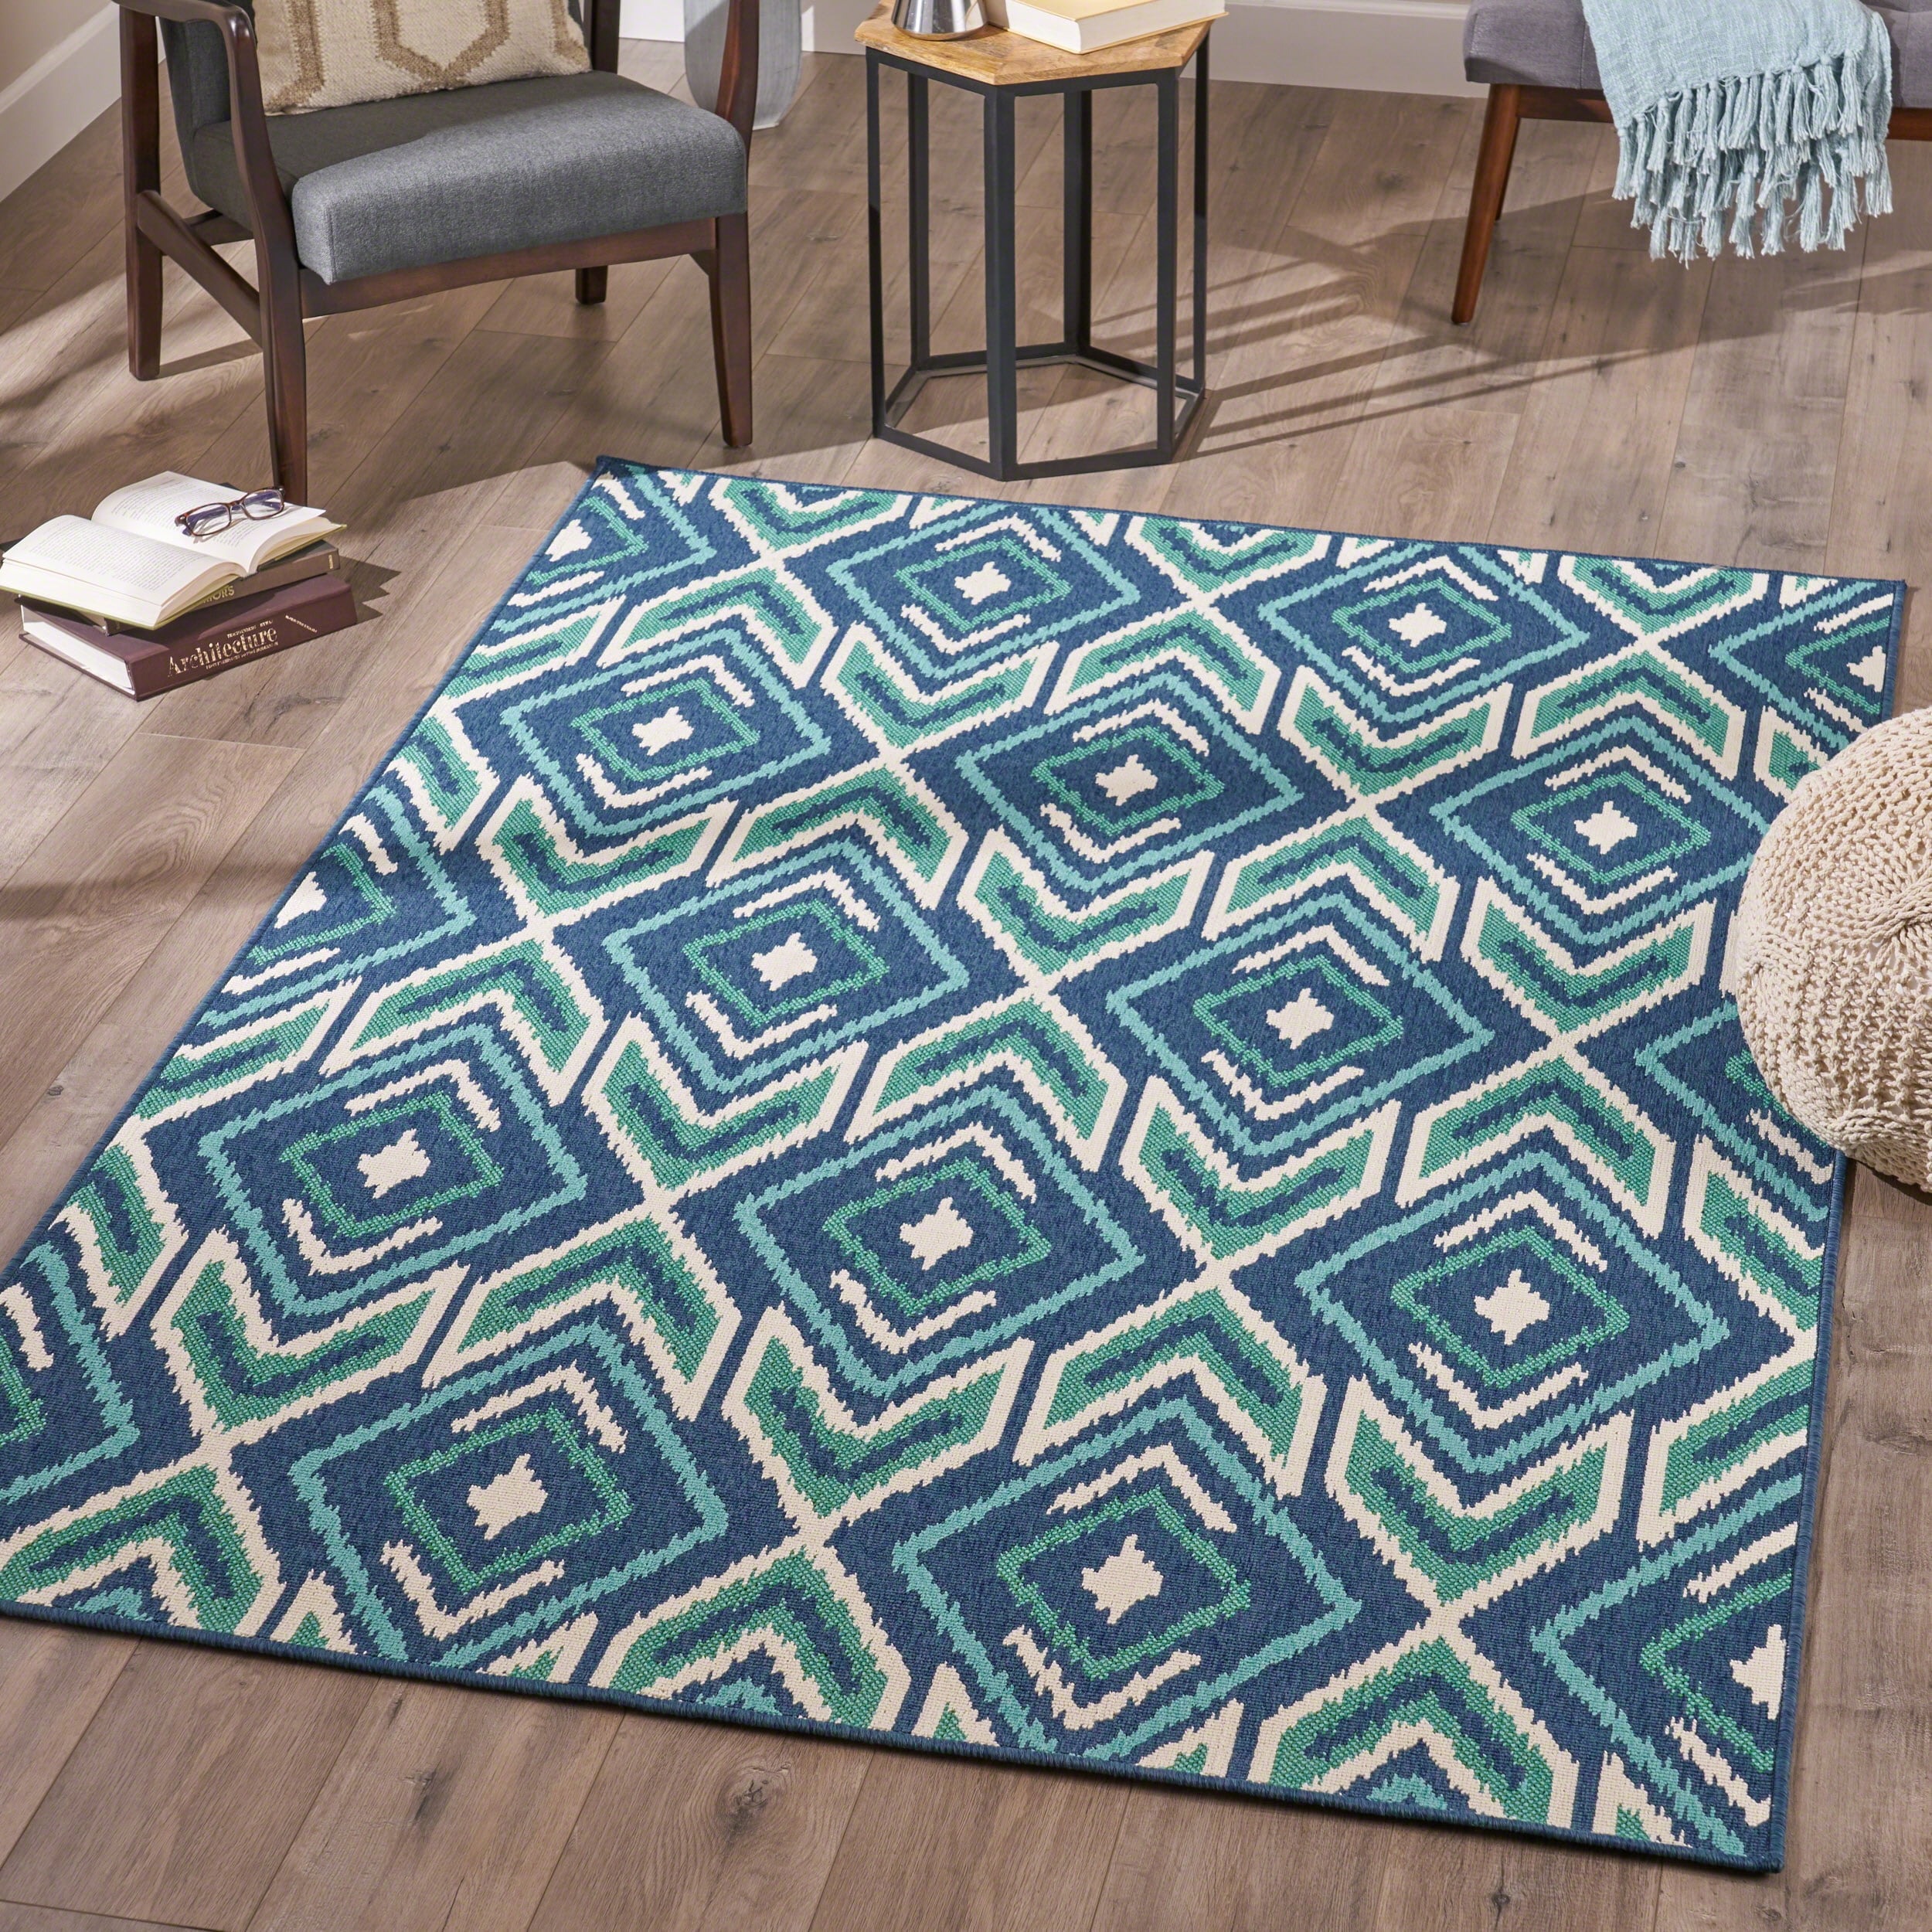 Paloma Blue Yellow Ochre Geometric Handcarved Durable Rug in various sizes 